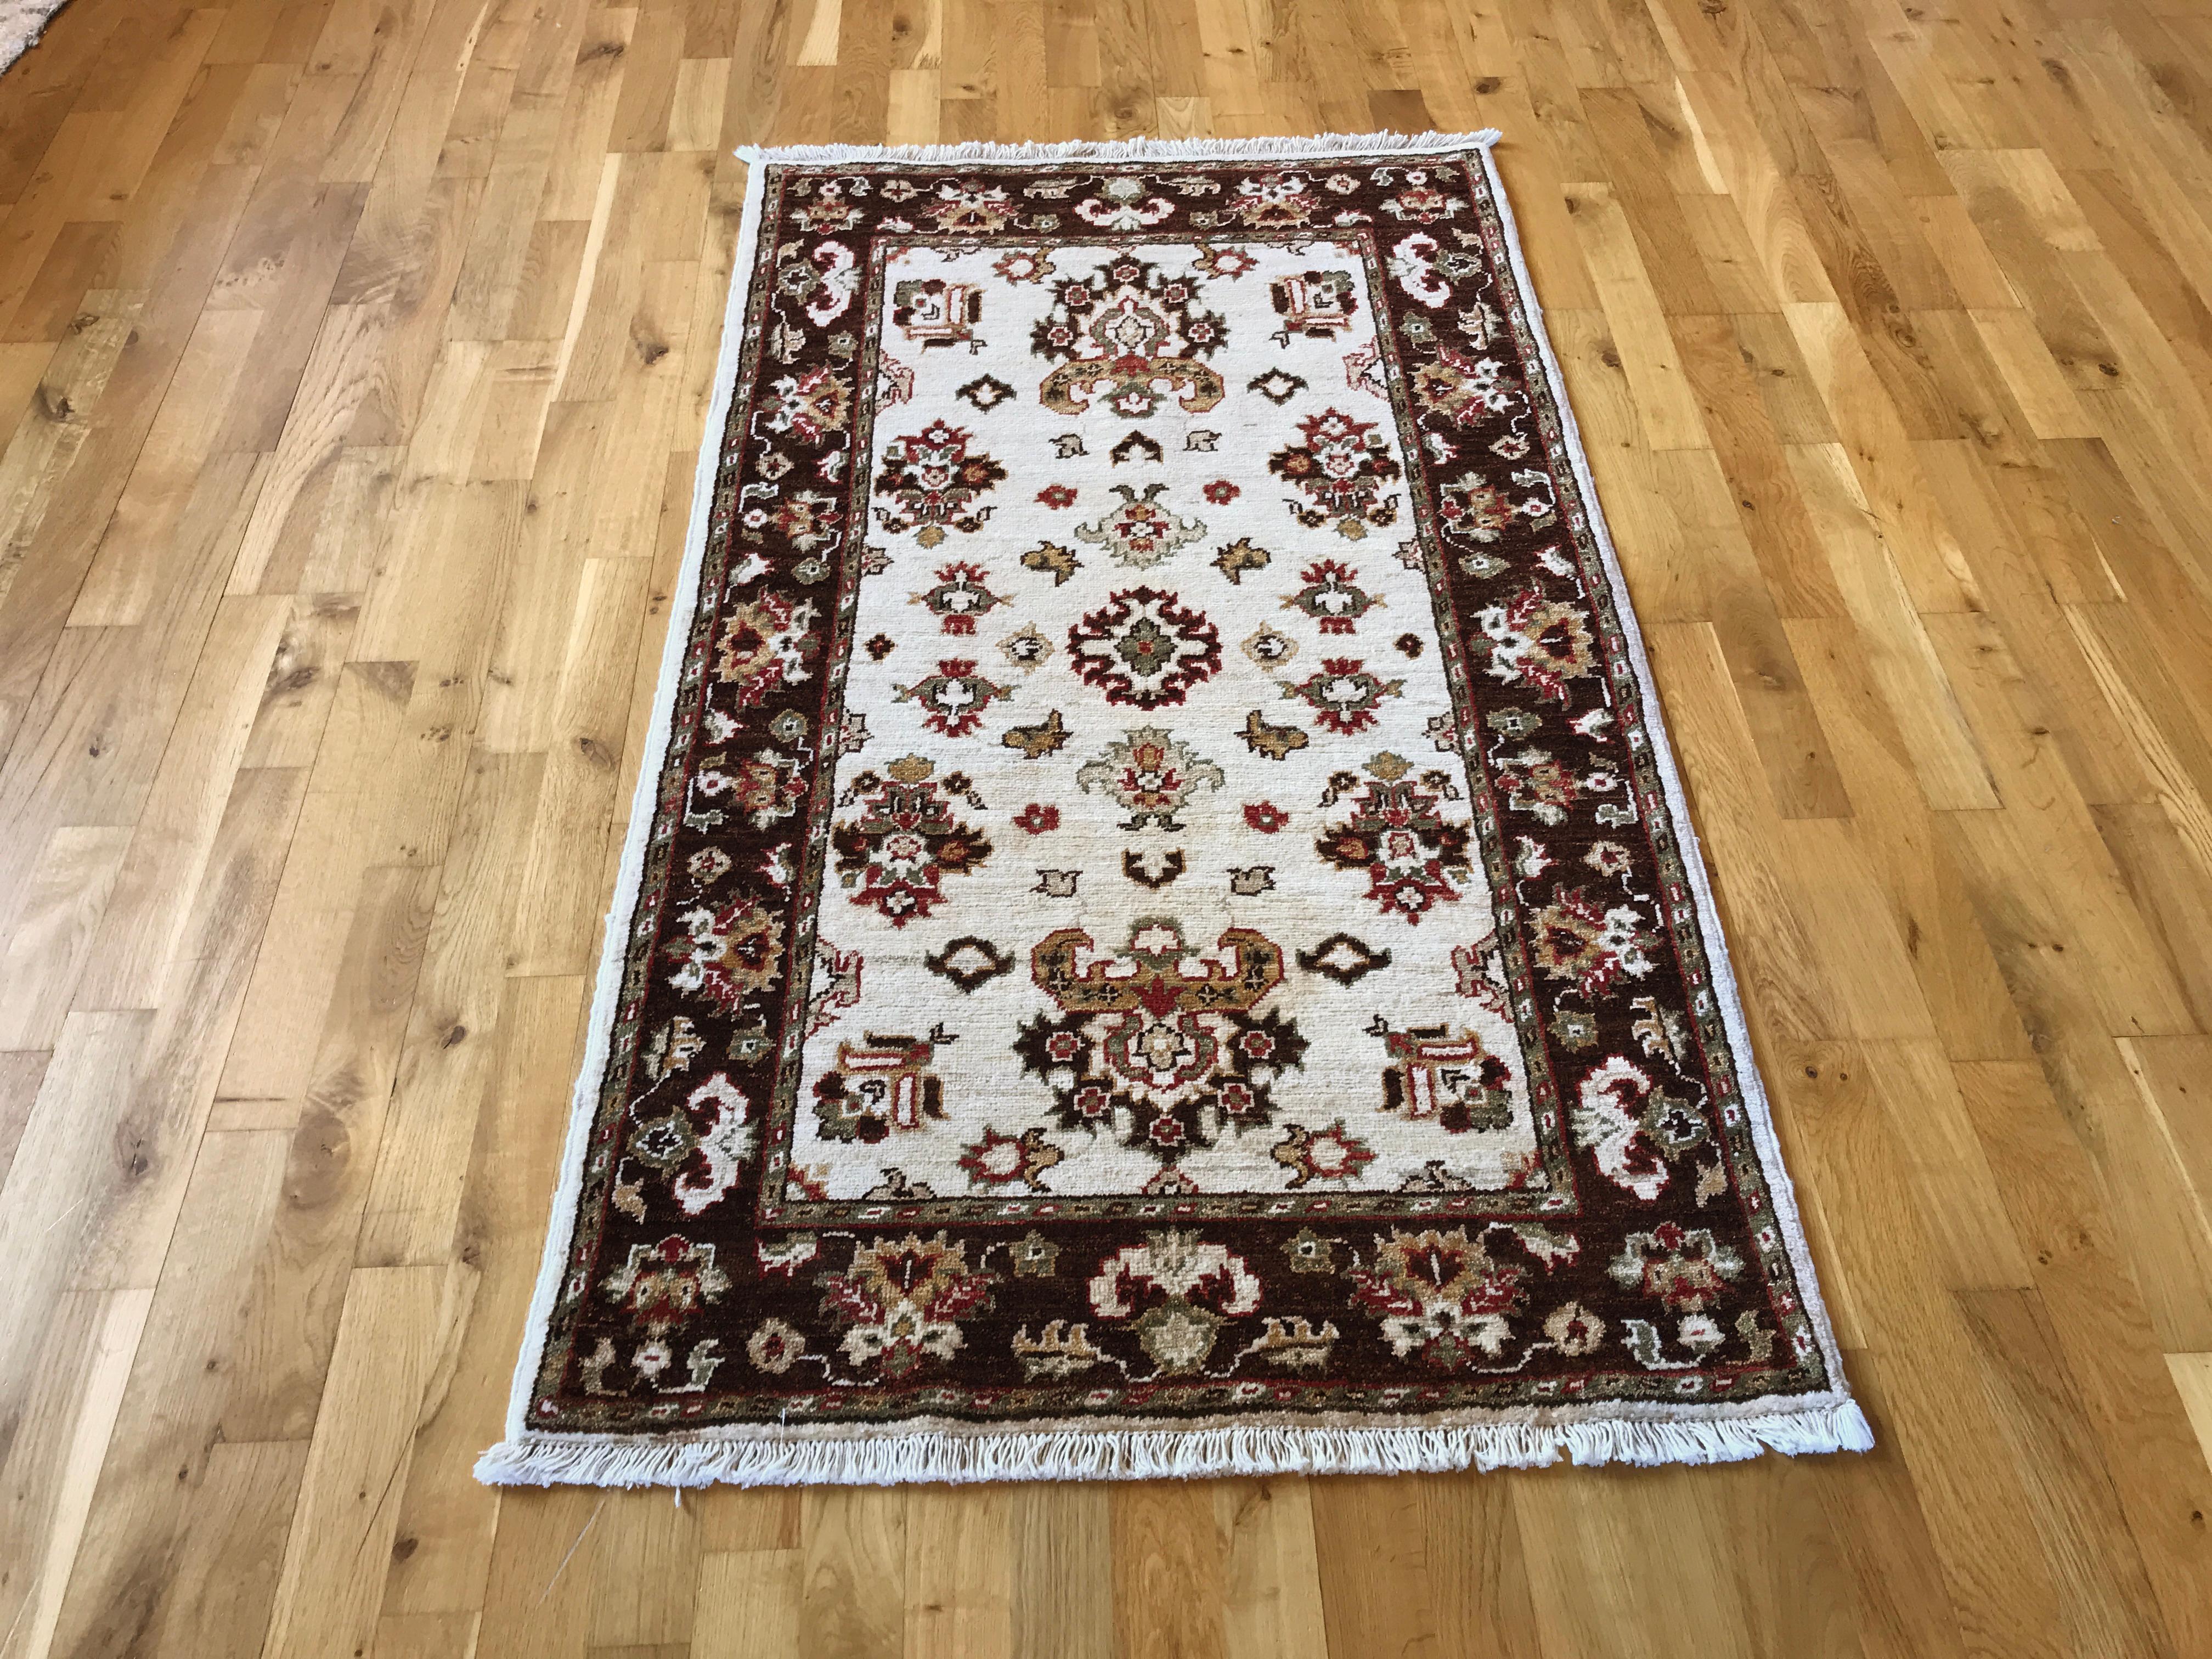 This hand-knotted wool rug was made in Pakistan and features a beautiful floral design in beige and brown. Crafted with expert precision, it adds a touch of elegance to any room while providing durability and comfort. A timeless addition to your